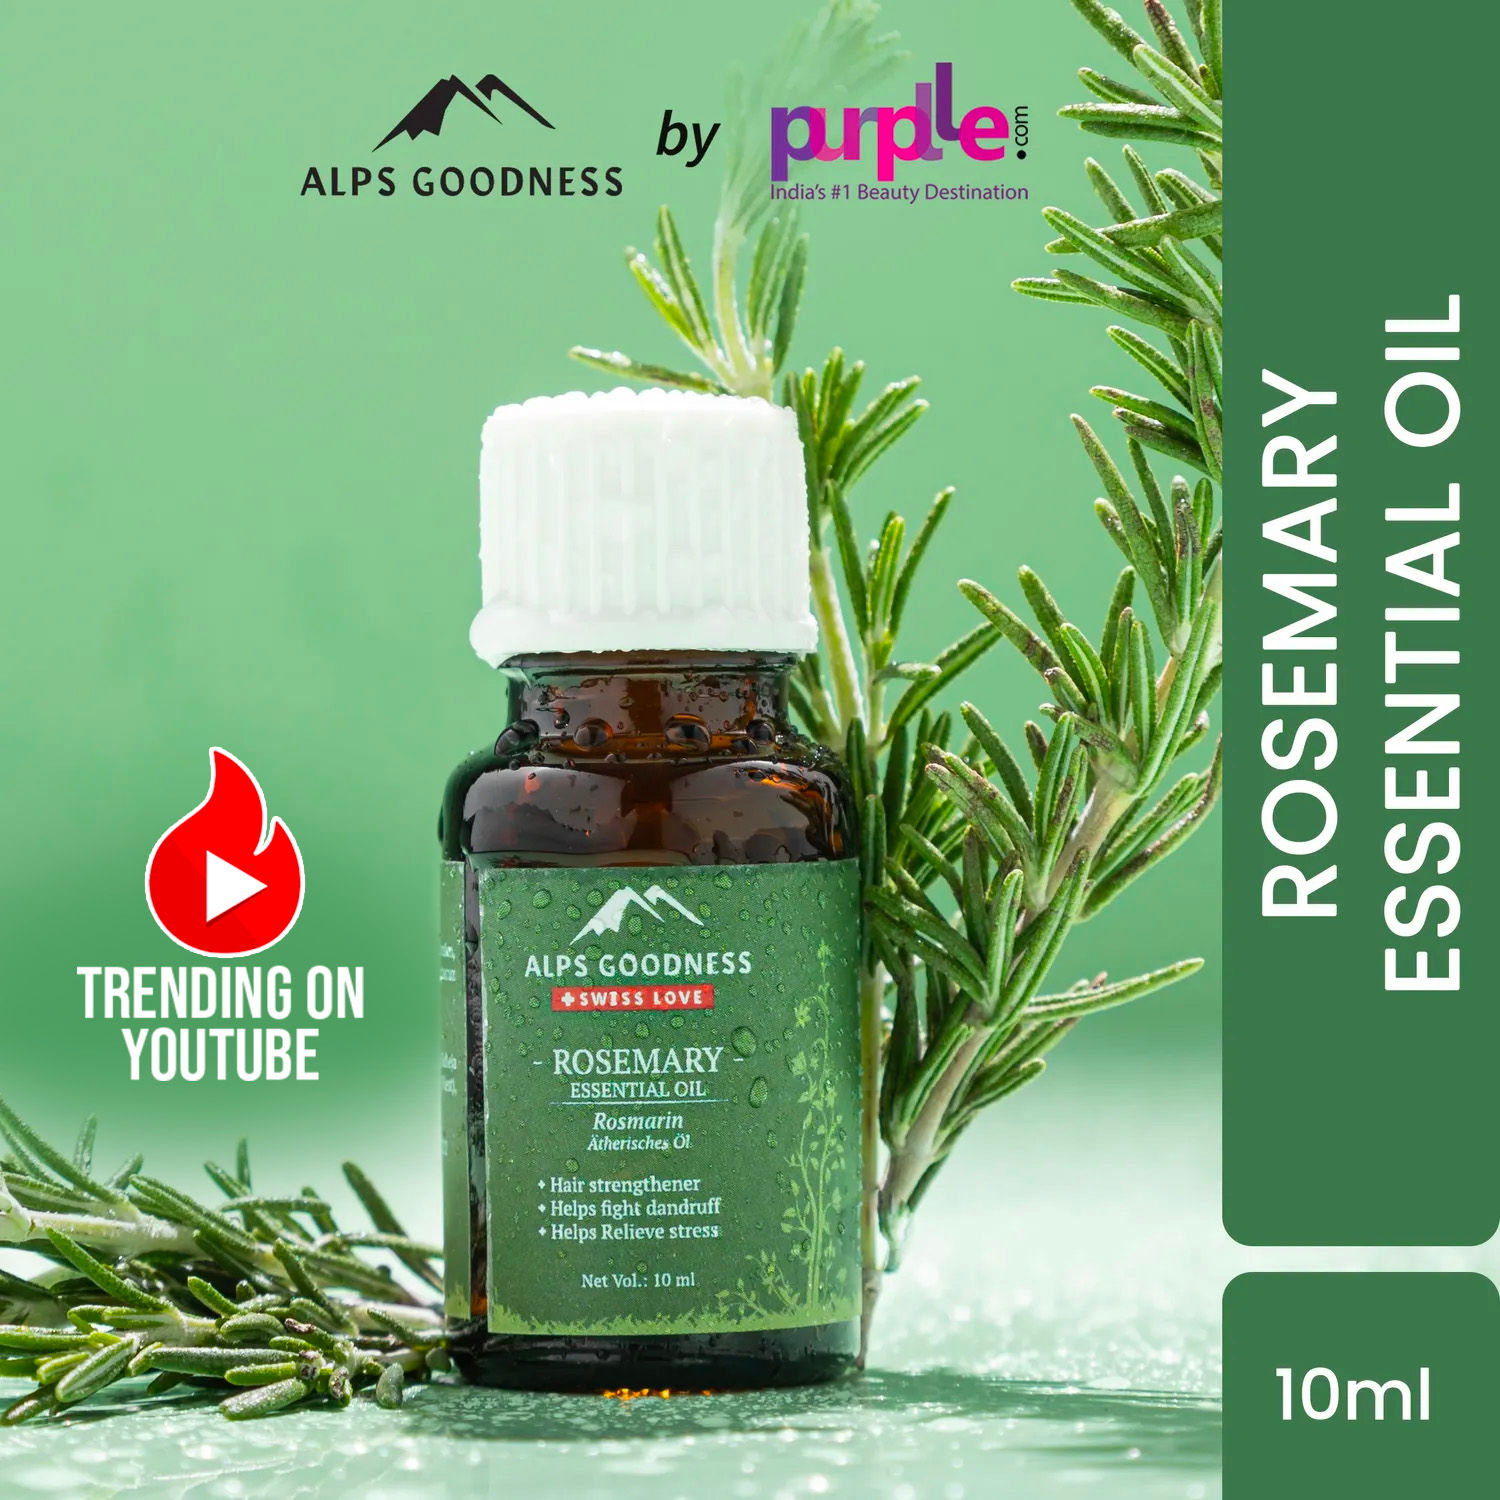 Buy Alps Goodness Pure Essential Oil - Rosemary (10ml) | Essential oil for Hair & Skin | Paraben Free, Fragnance Free, Mineral Oil Free | Healthy Hair Growth | Fights Acne - Purplle